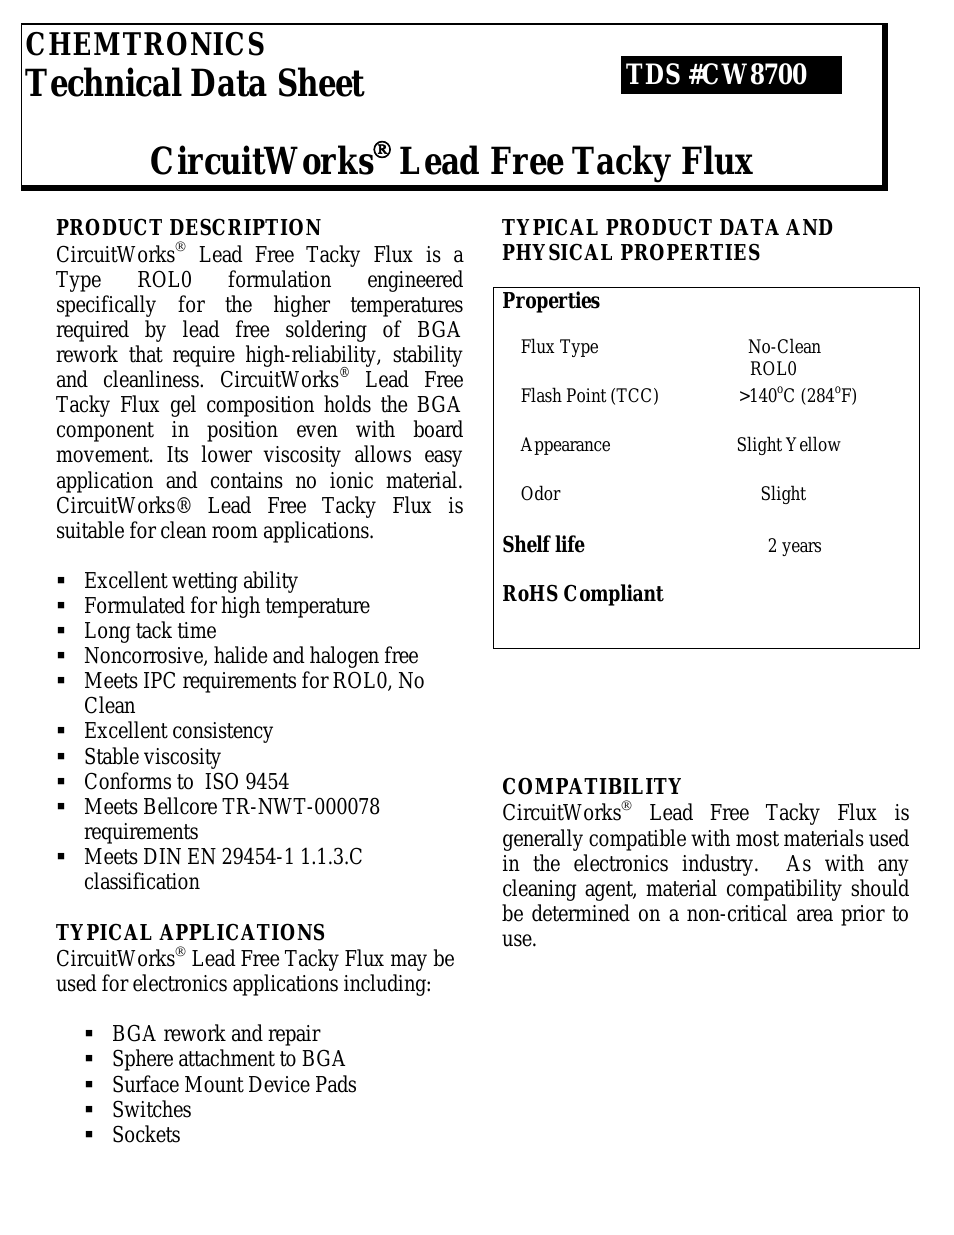 CircuitWorks® Lead-Free Tacky Flux CW8700